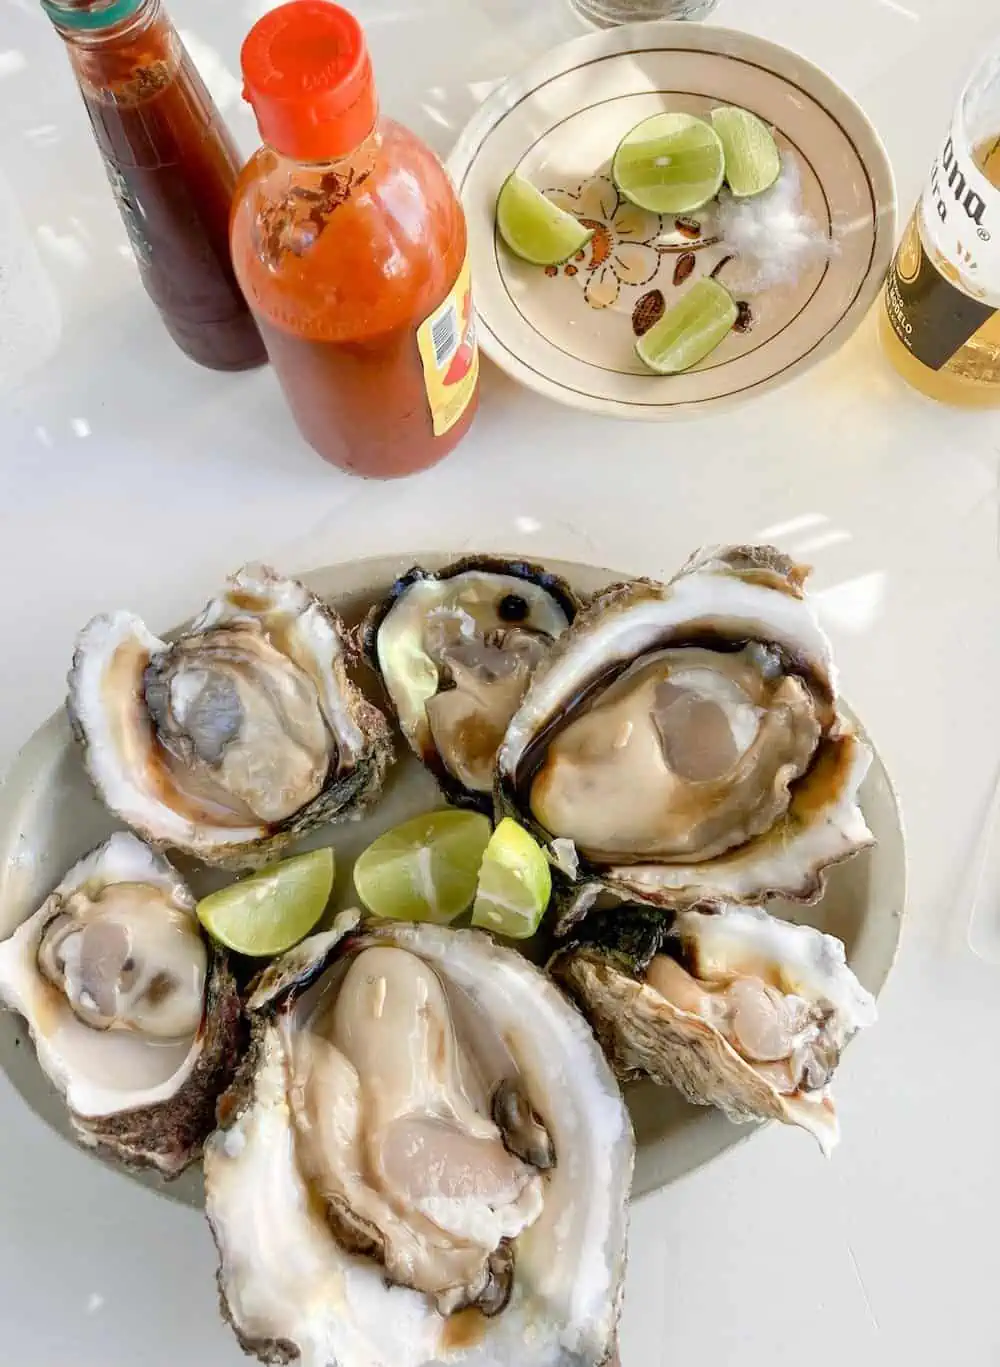 A platter of six fresh oysters with hot sauce.  